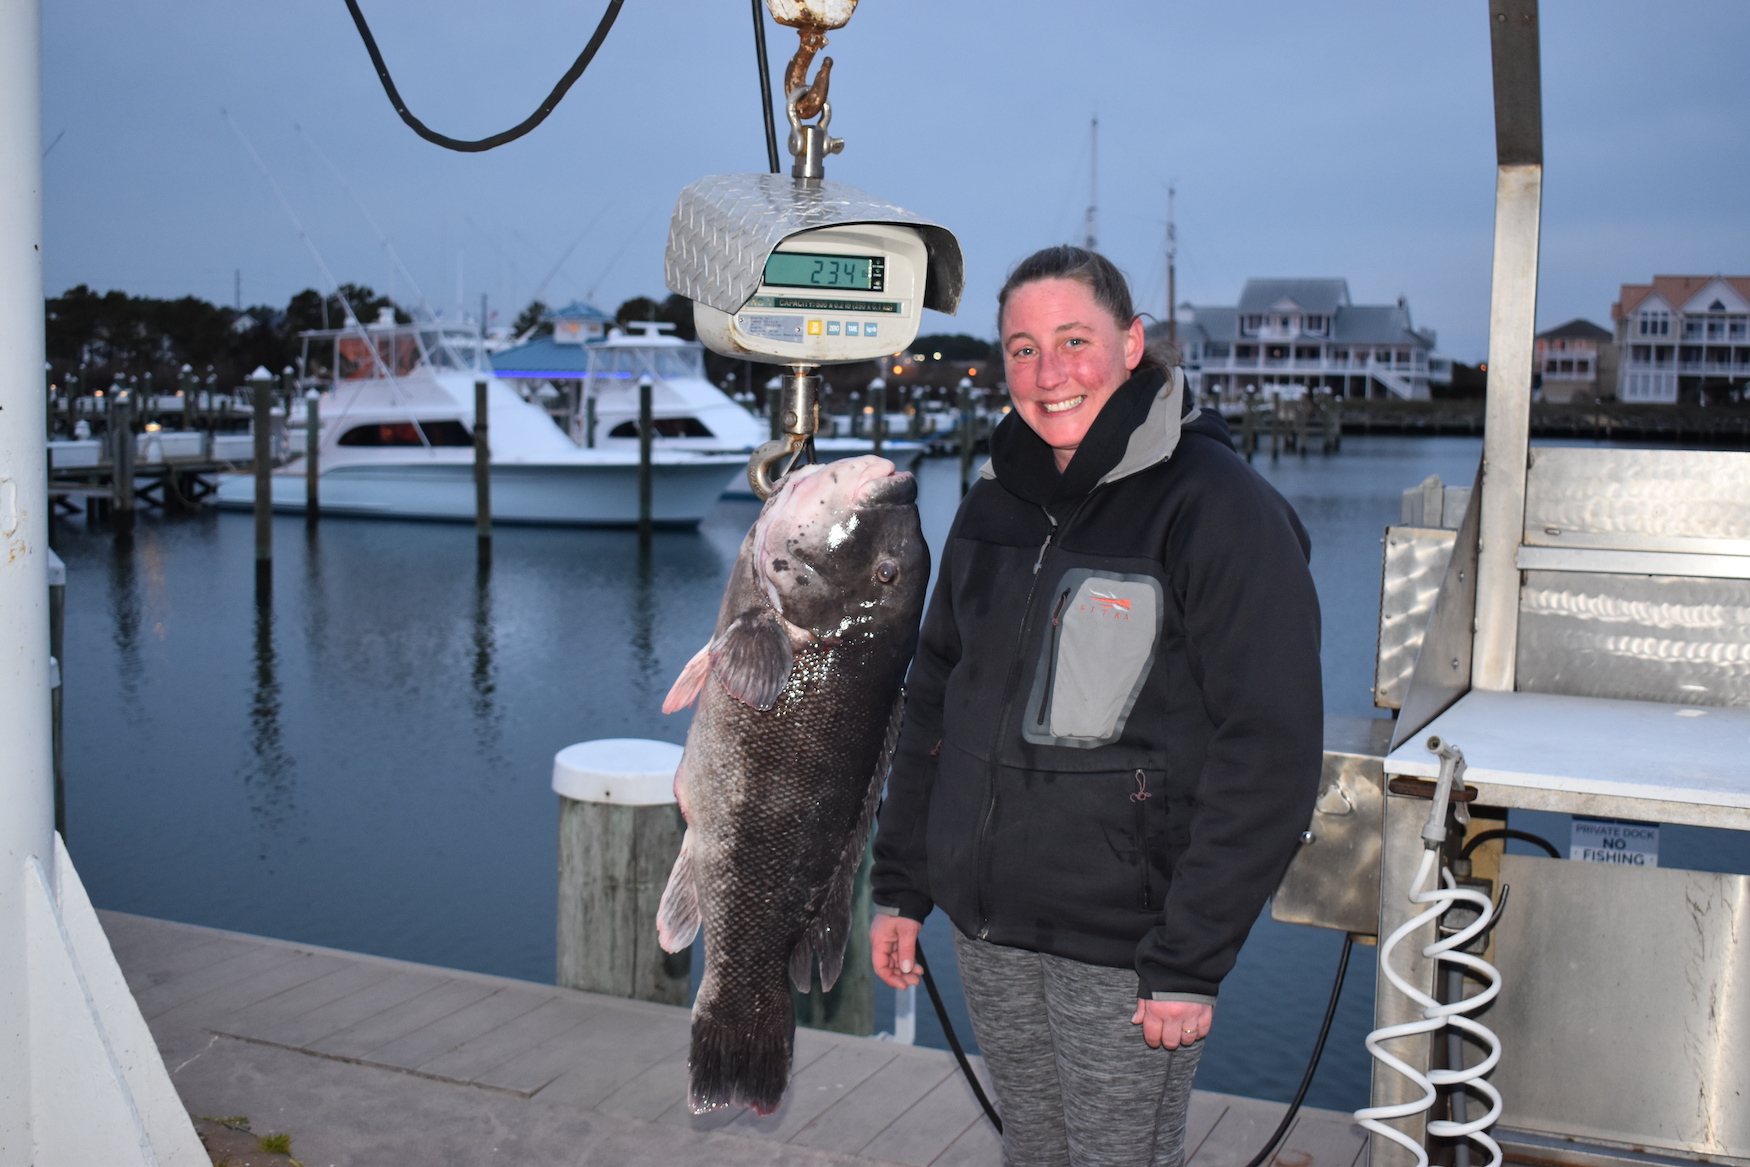 23.4 Pound Tautog Could Be New Lady Angler World Record - Ocean City MD  Fishing